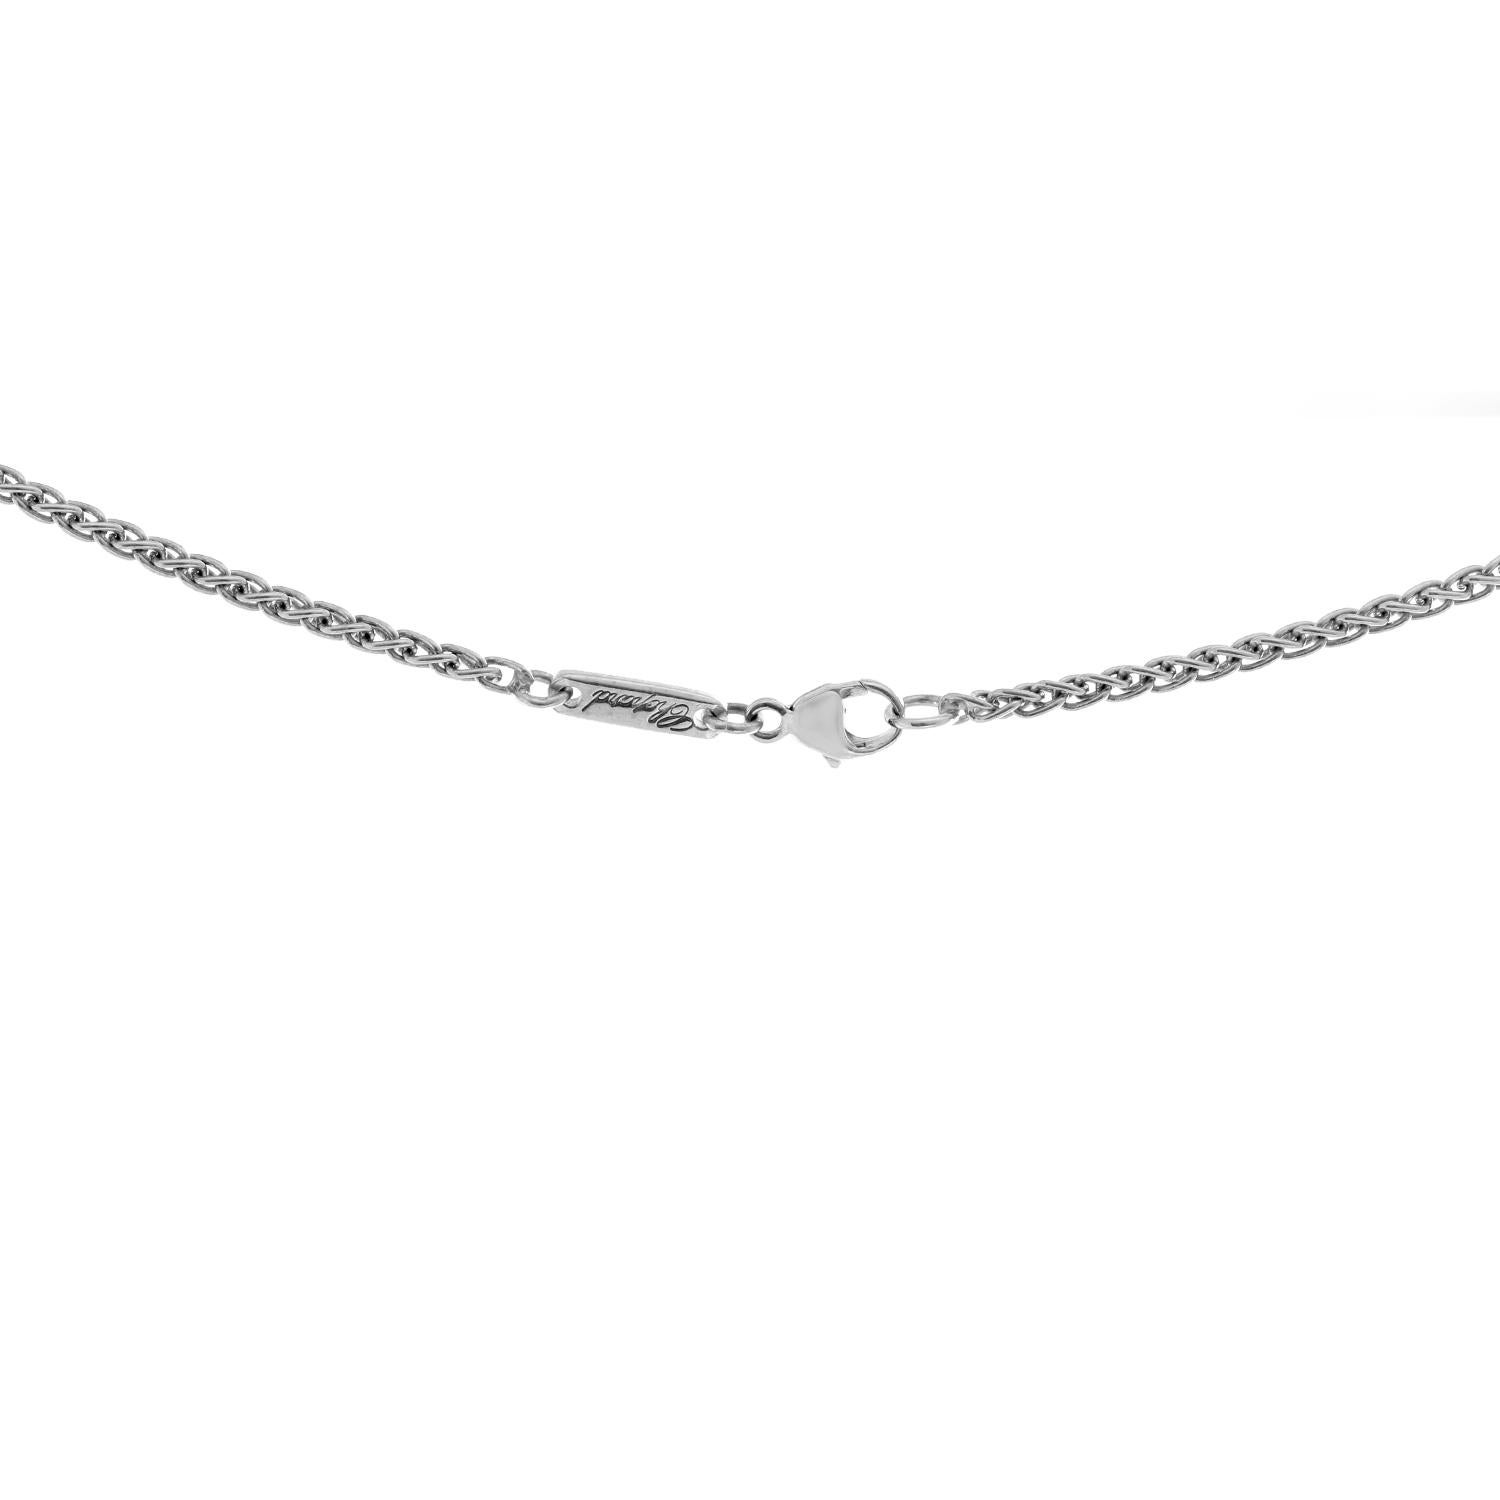 Women's Chopard White Gold Floating Diamond Heart Necklace